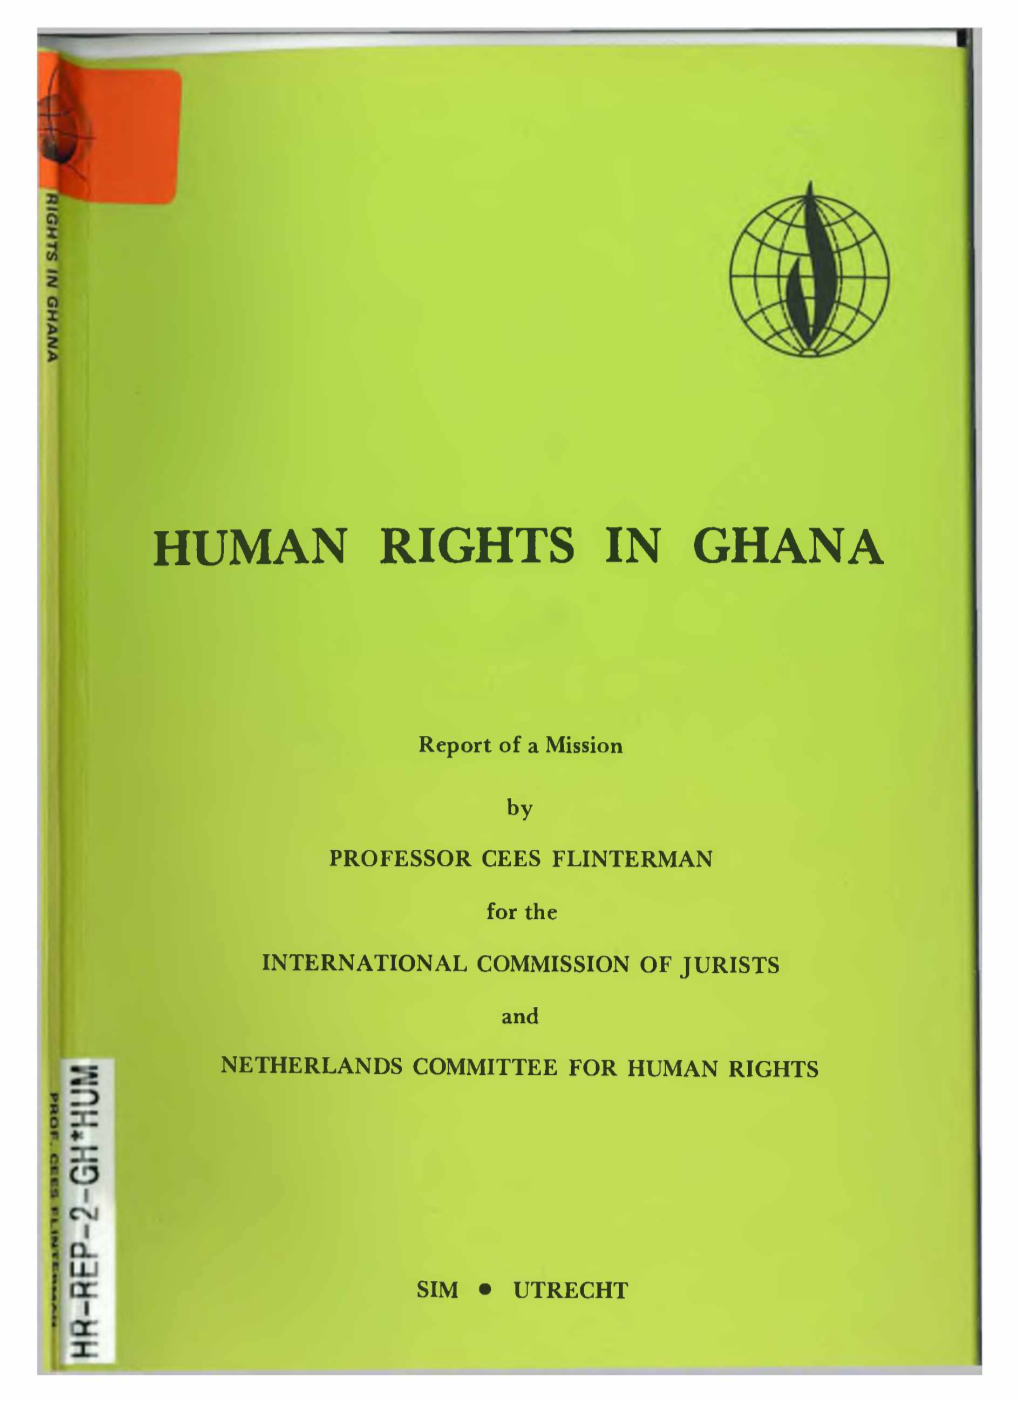 Human Rights in Ghana